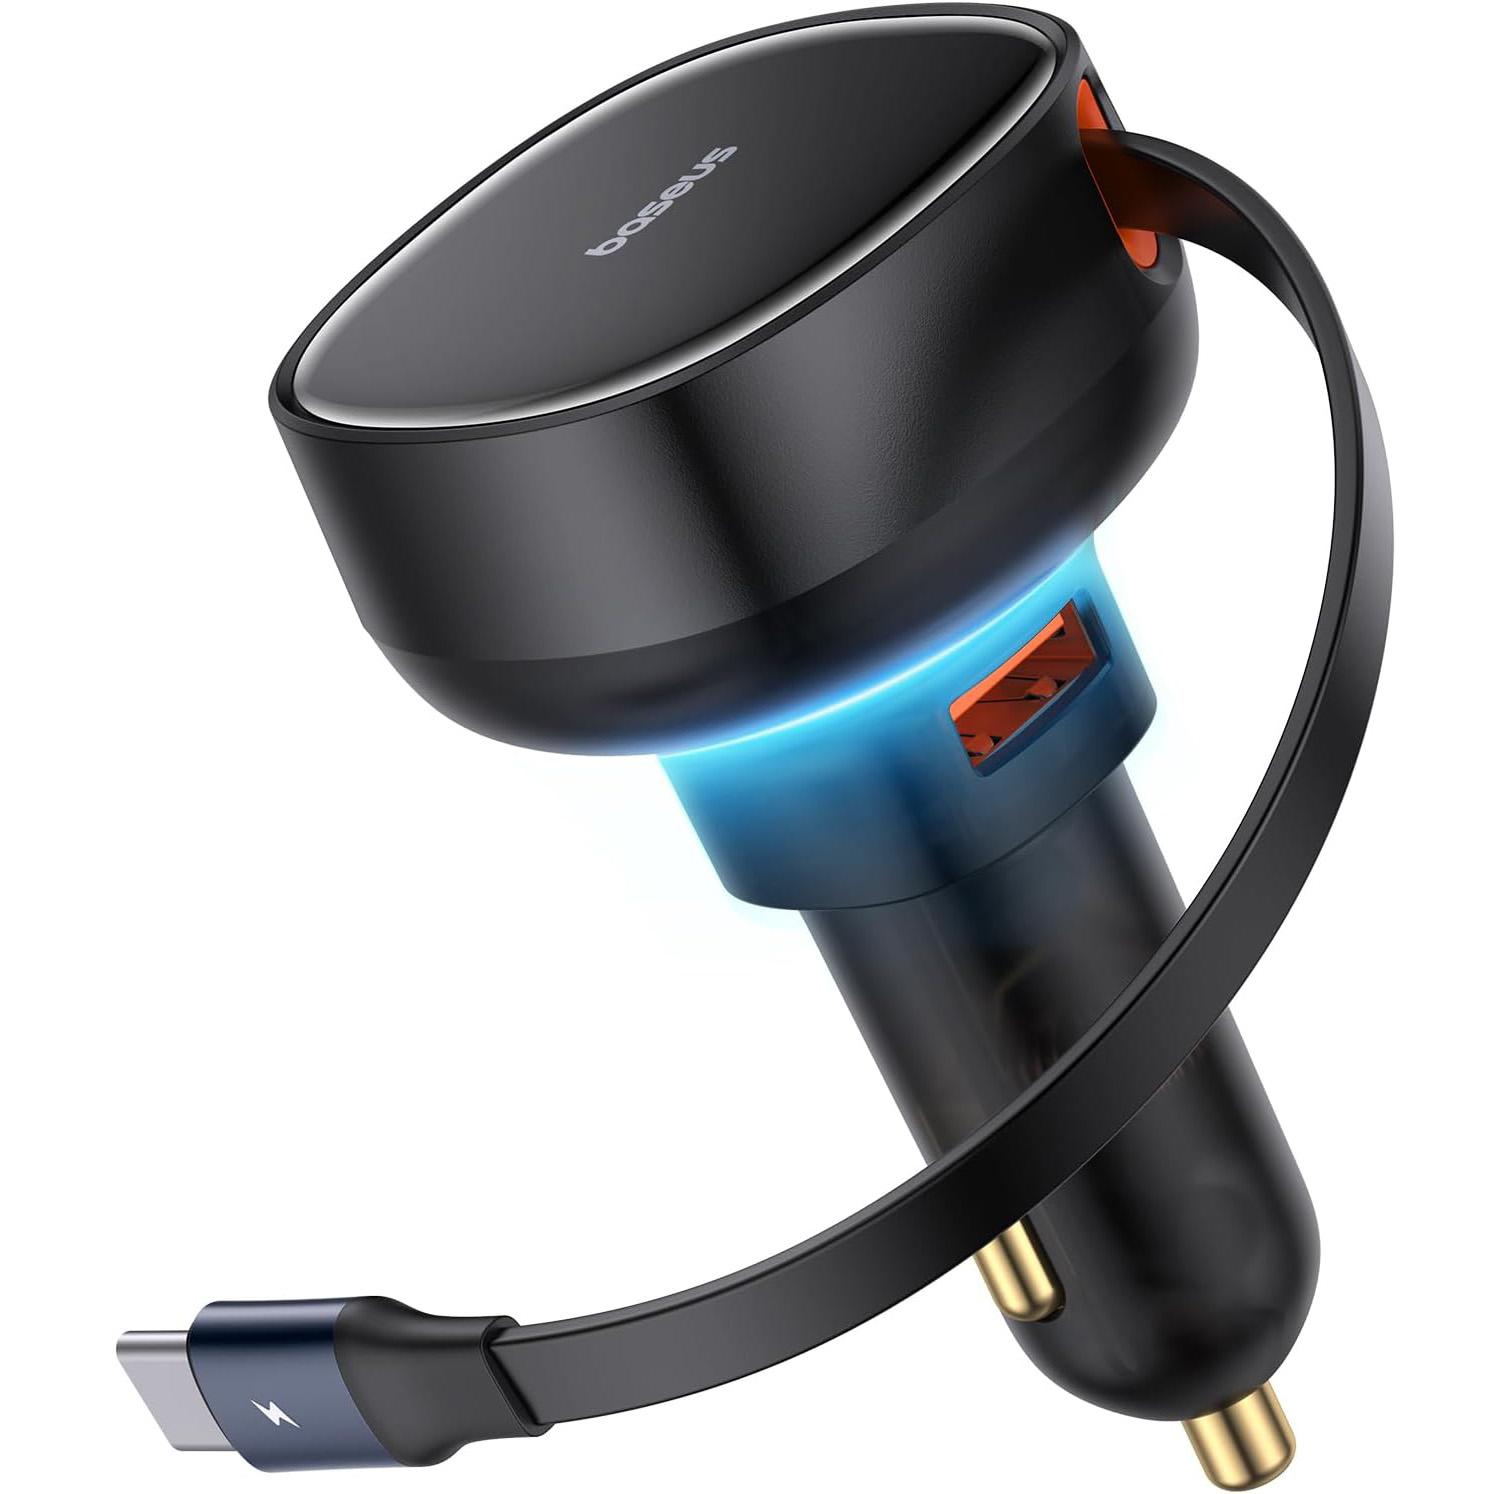 Baseus 60w USB-C Car Charger for $12.99